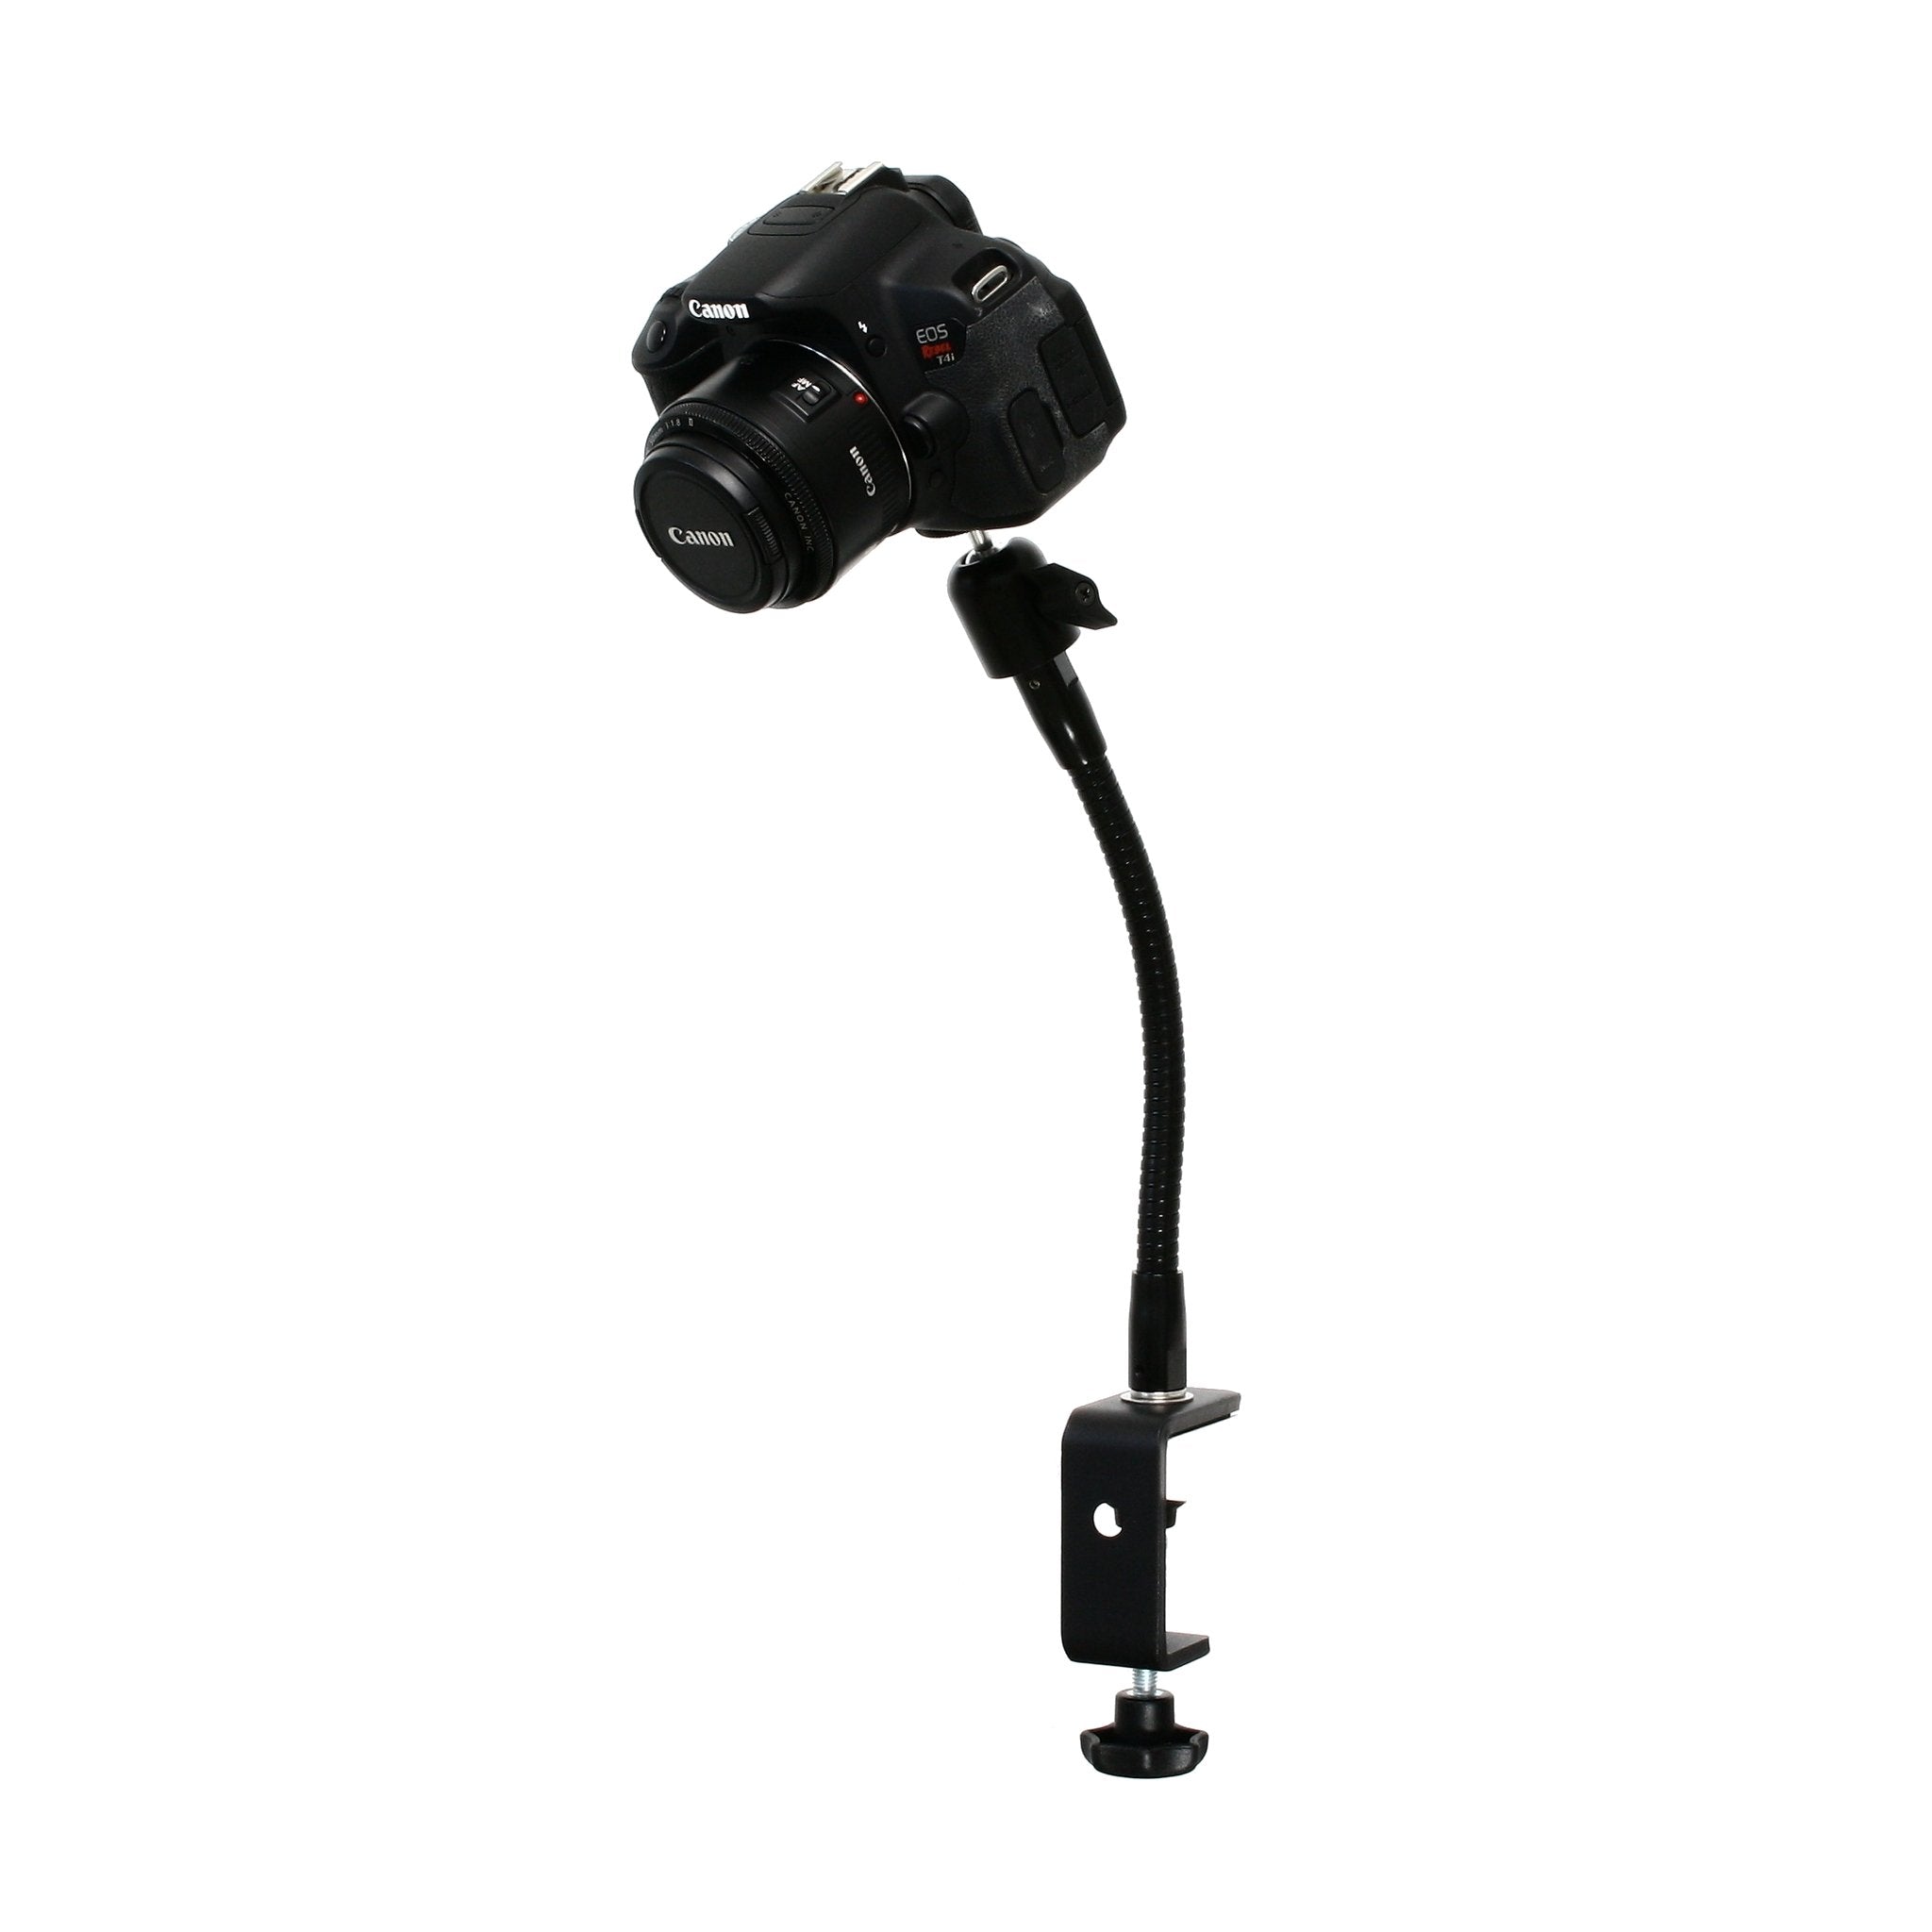 SnakeClamp 9 Black Flexible Arm Camera Stand with Round Base